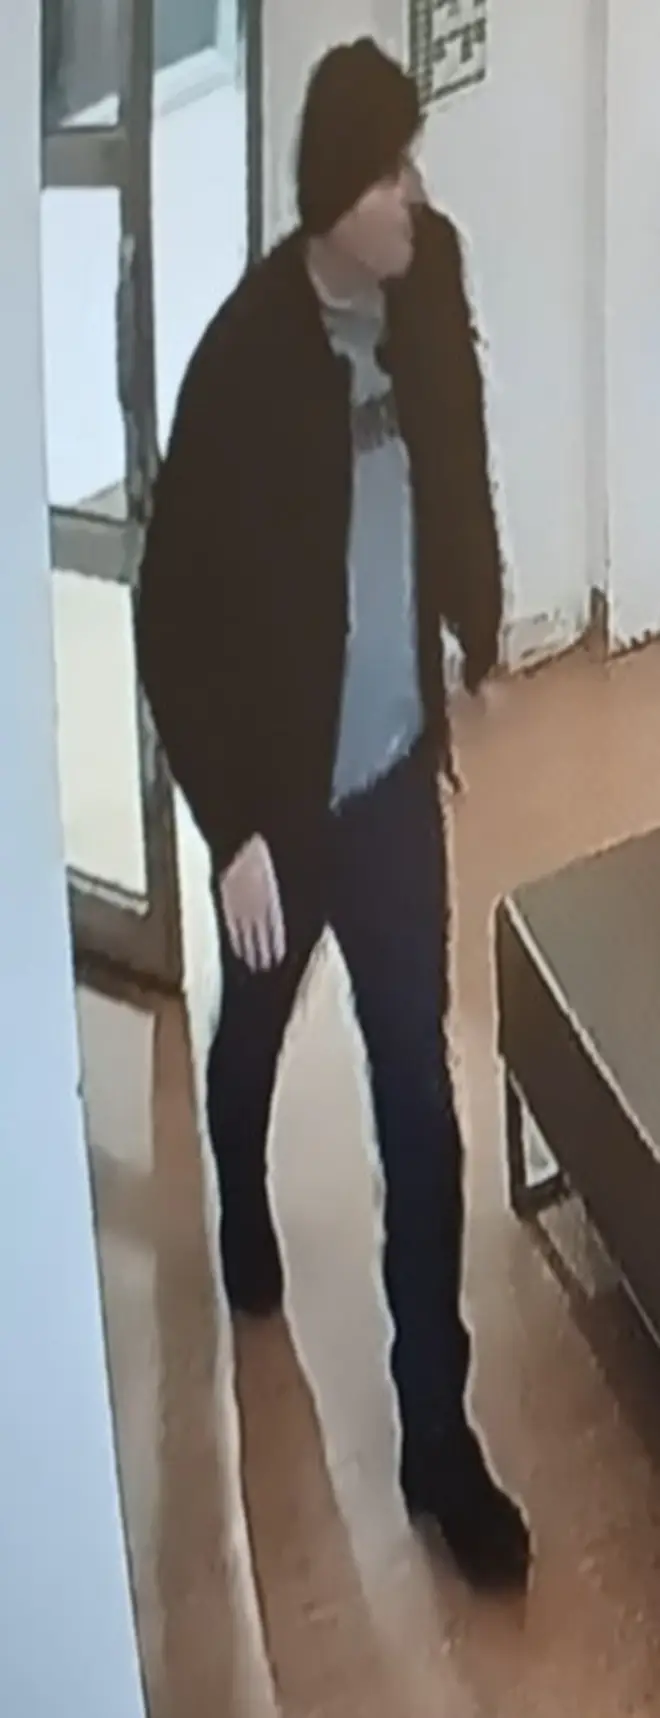 Image  showing the clothing he was wearing when last seen